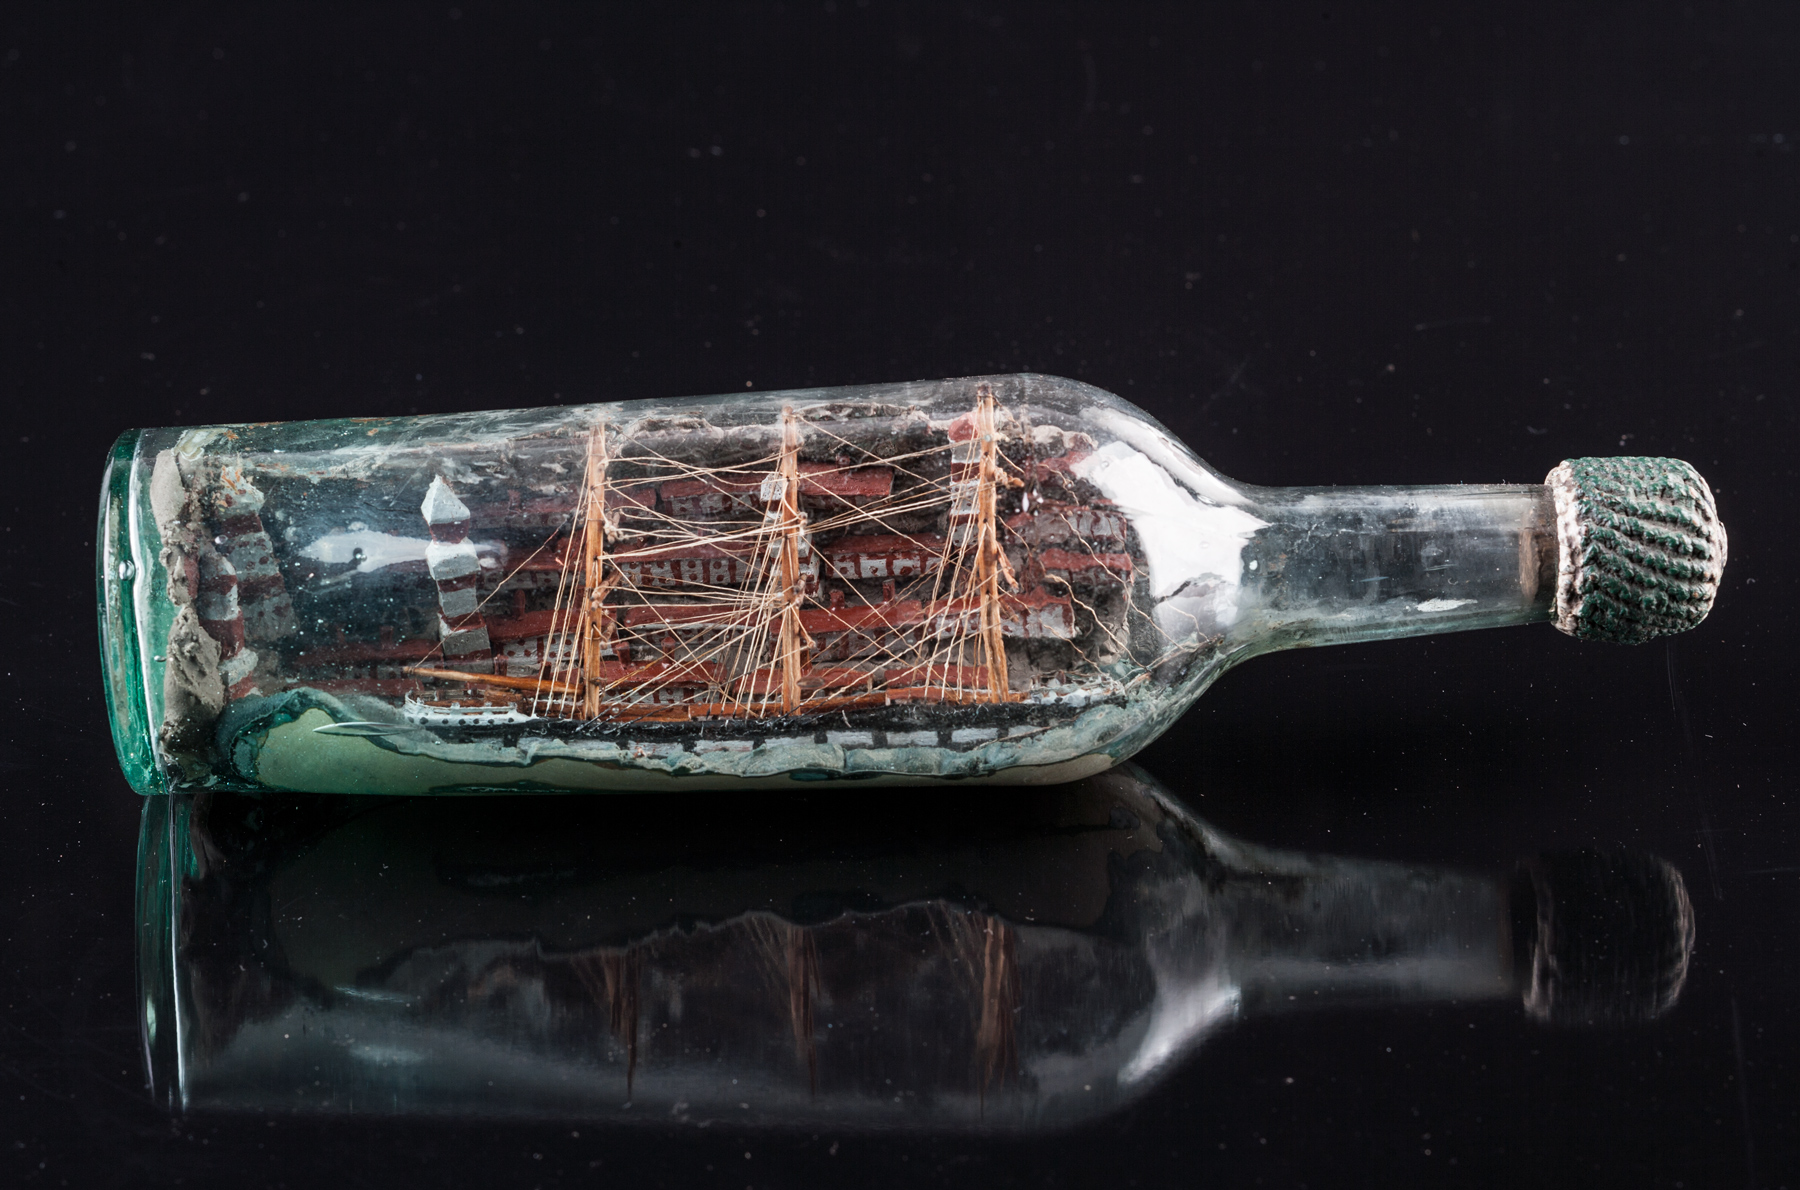 Dual masted Schooner, The Palma ship in bottle - Cap'n Steves Ship in a  bottle, Antique and one of a kind ships in a bottle